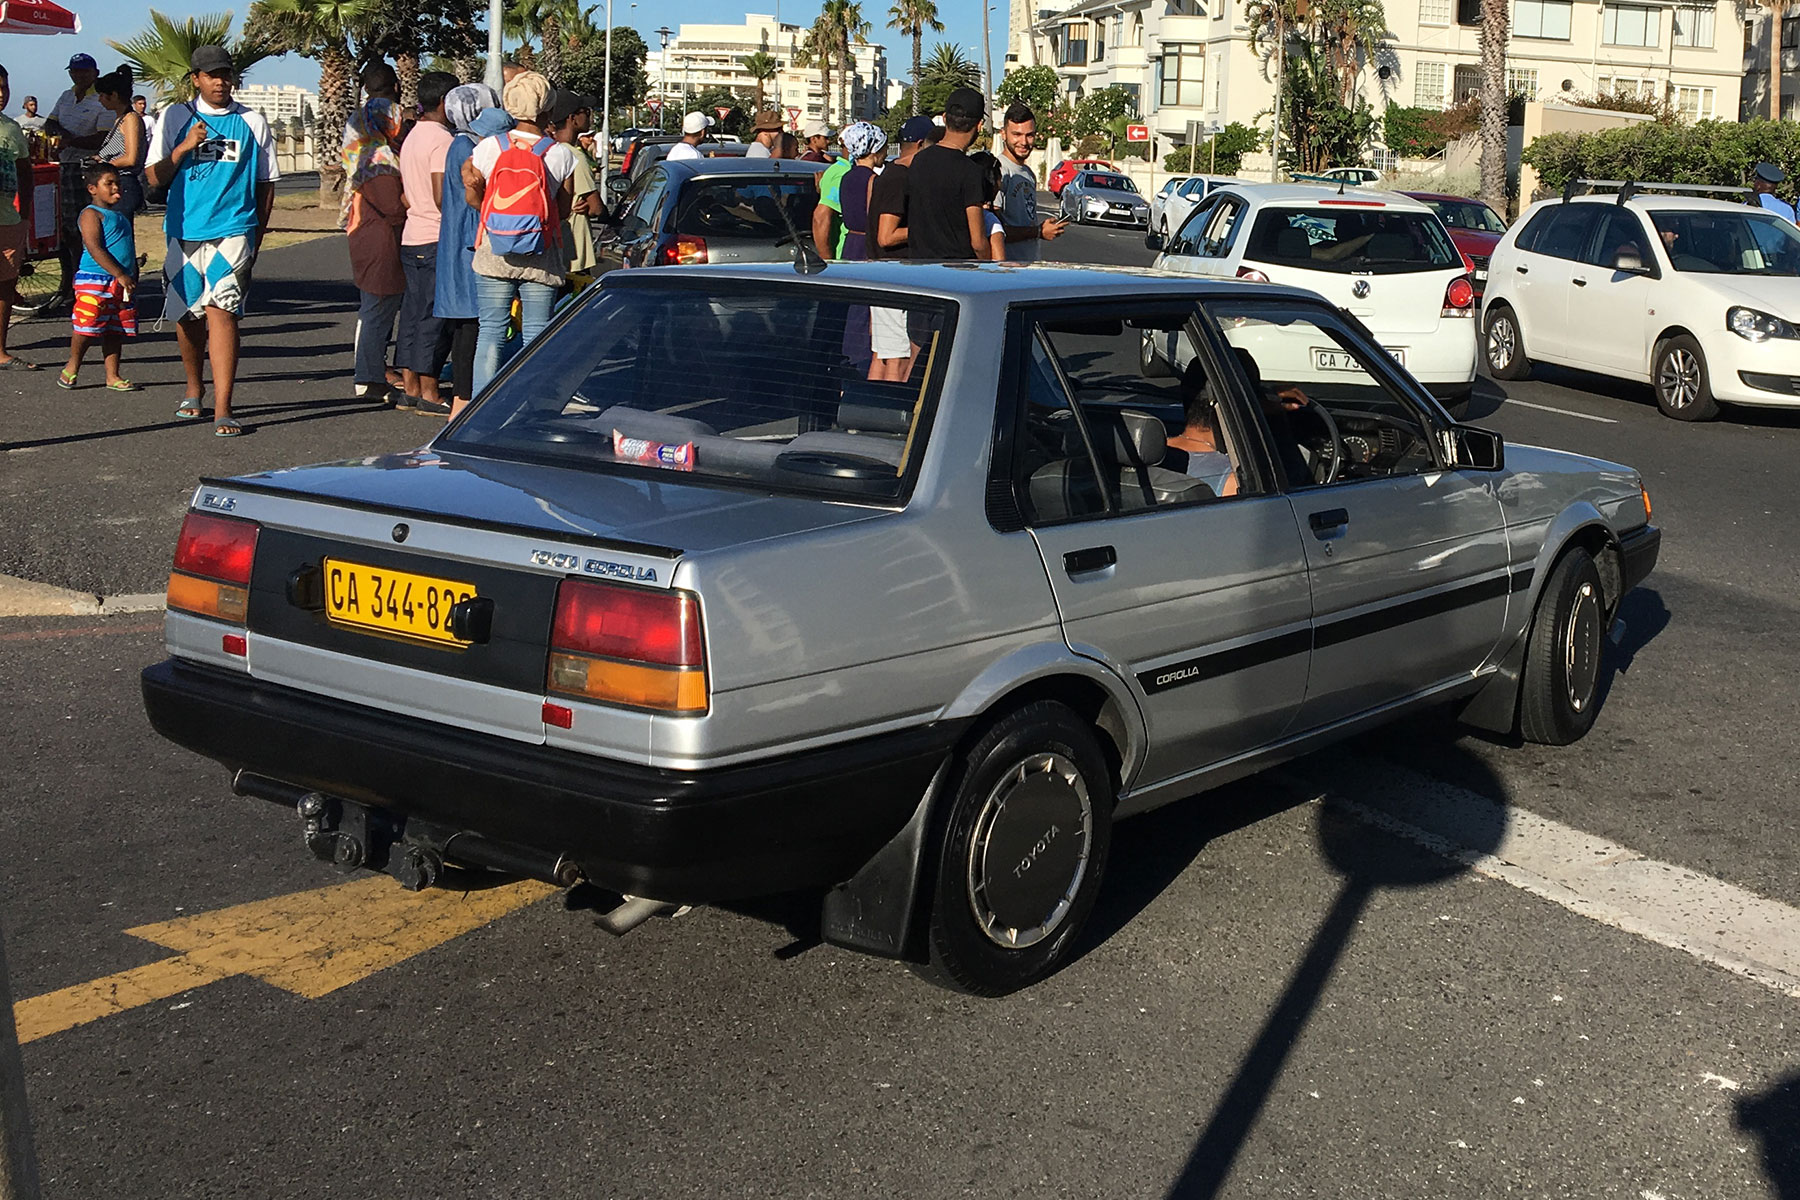 Cape Town: the South African city with incredible car culture